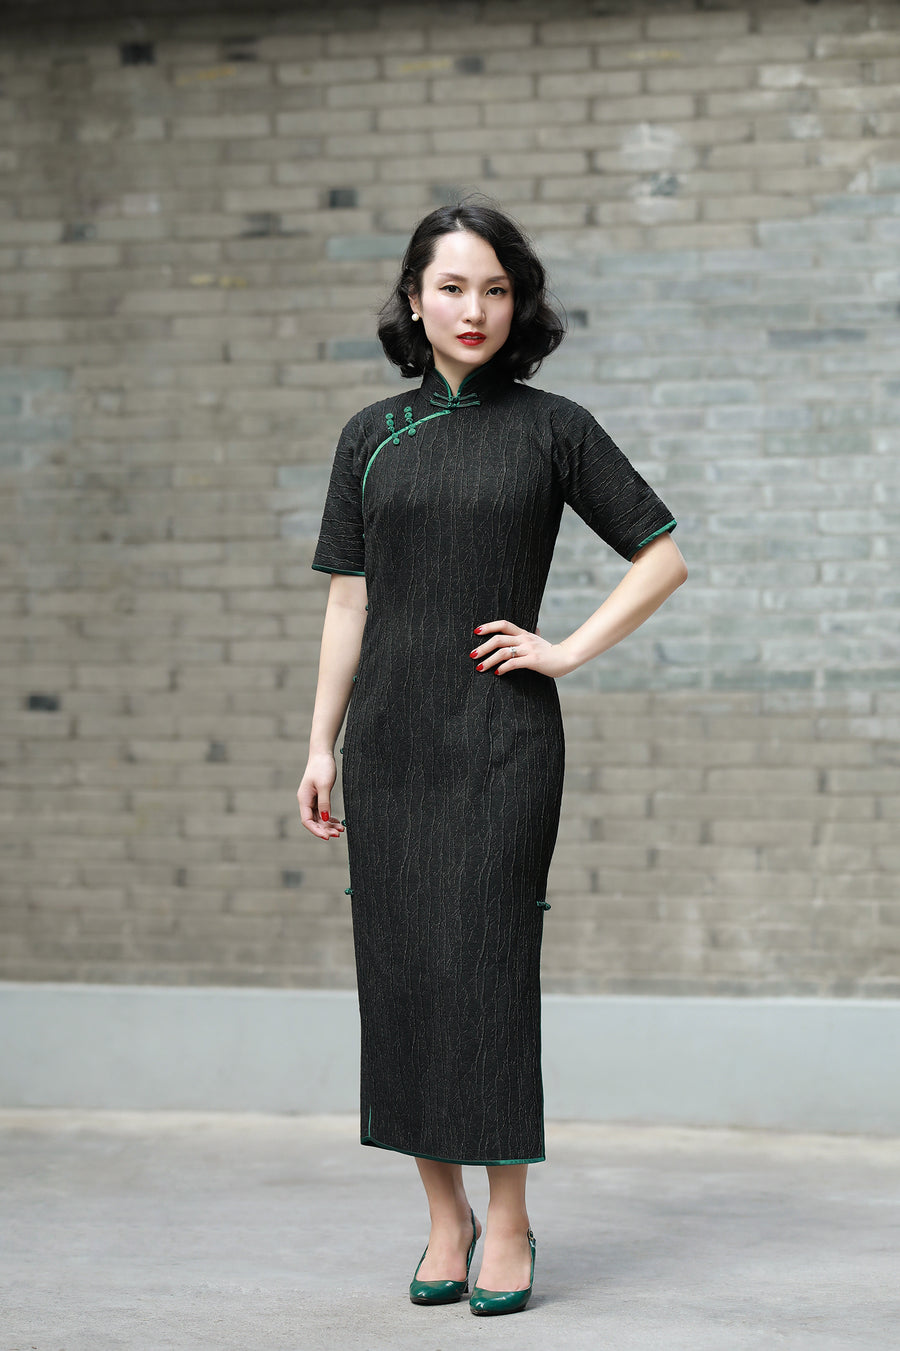 The Touch of Teal Qipao - Textured Charcoal